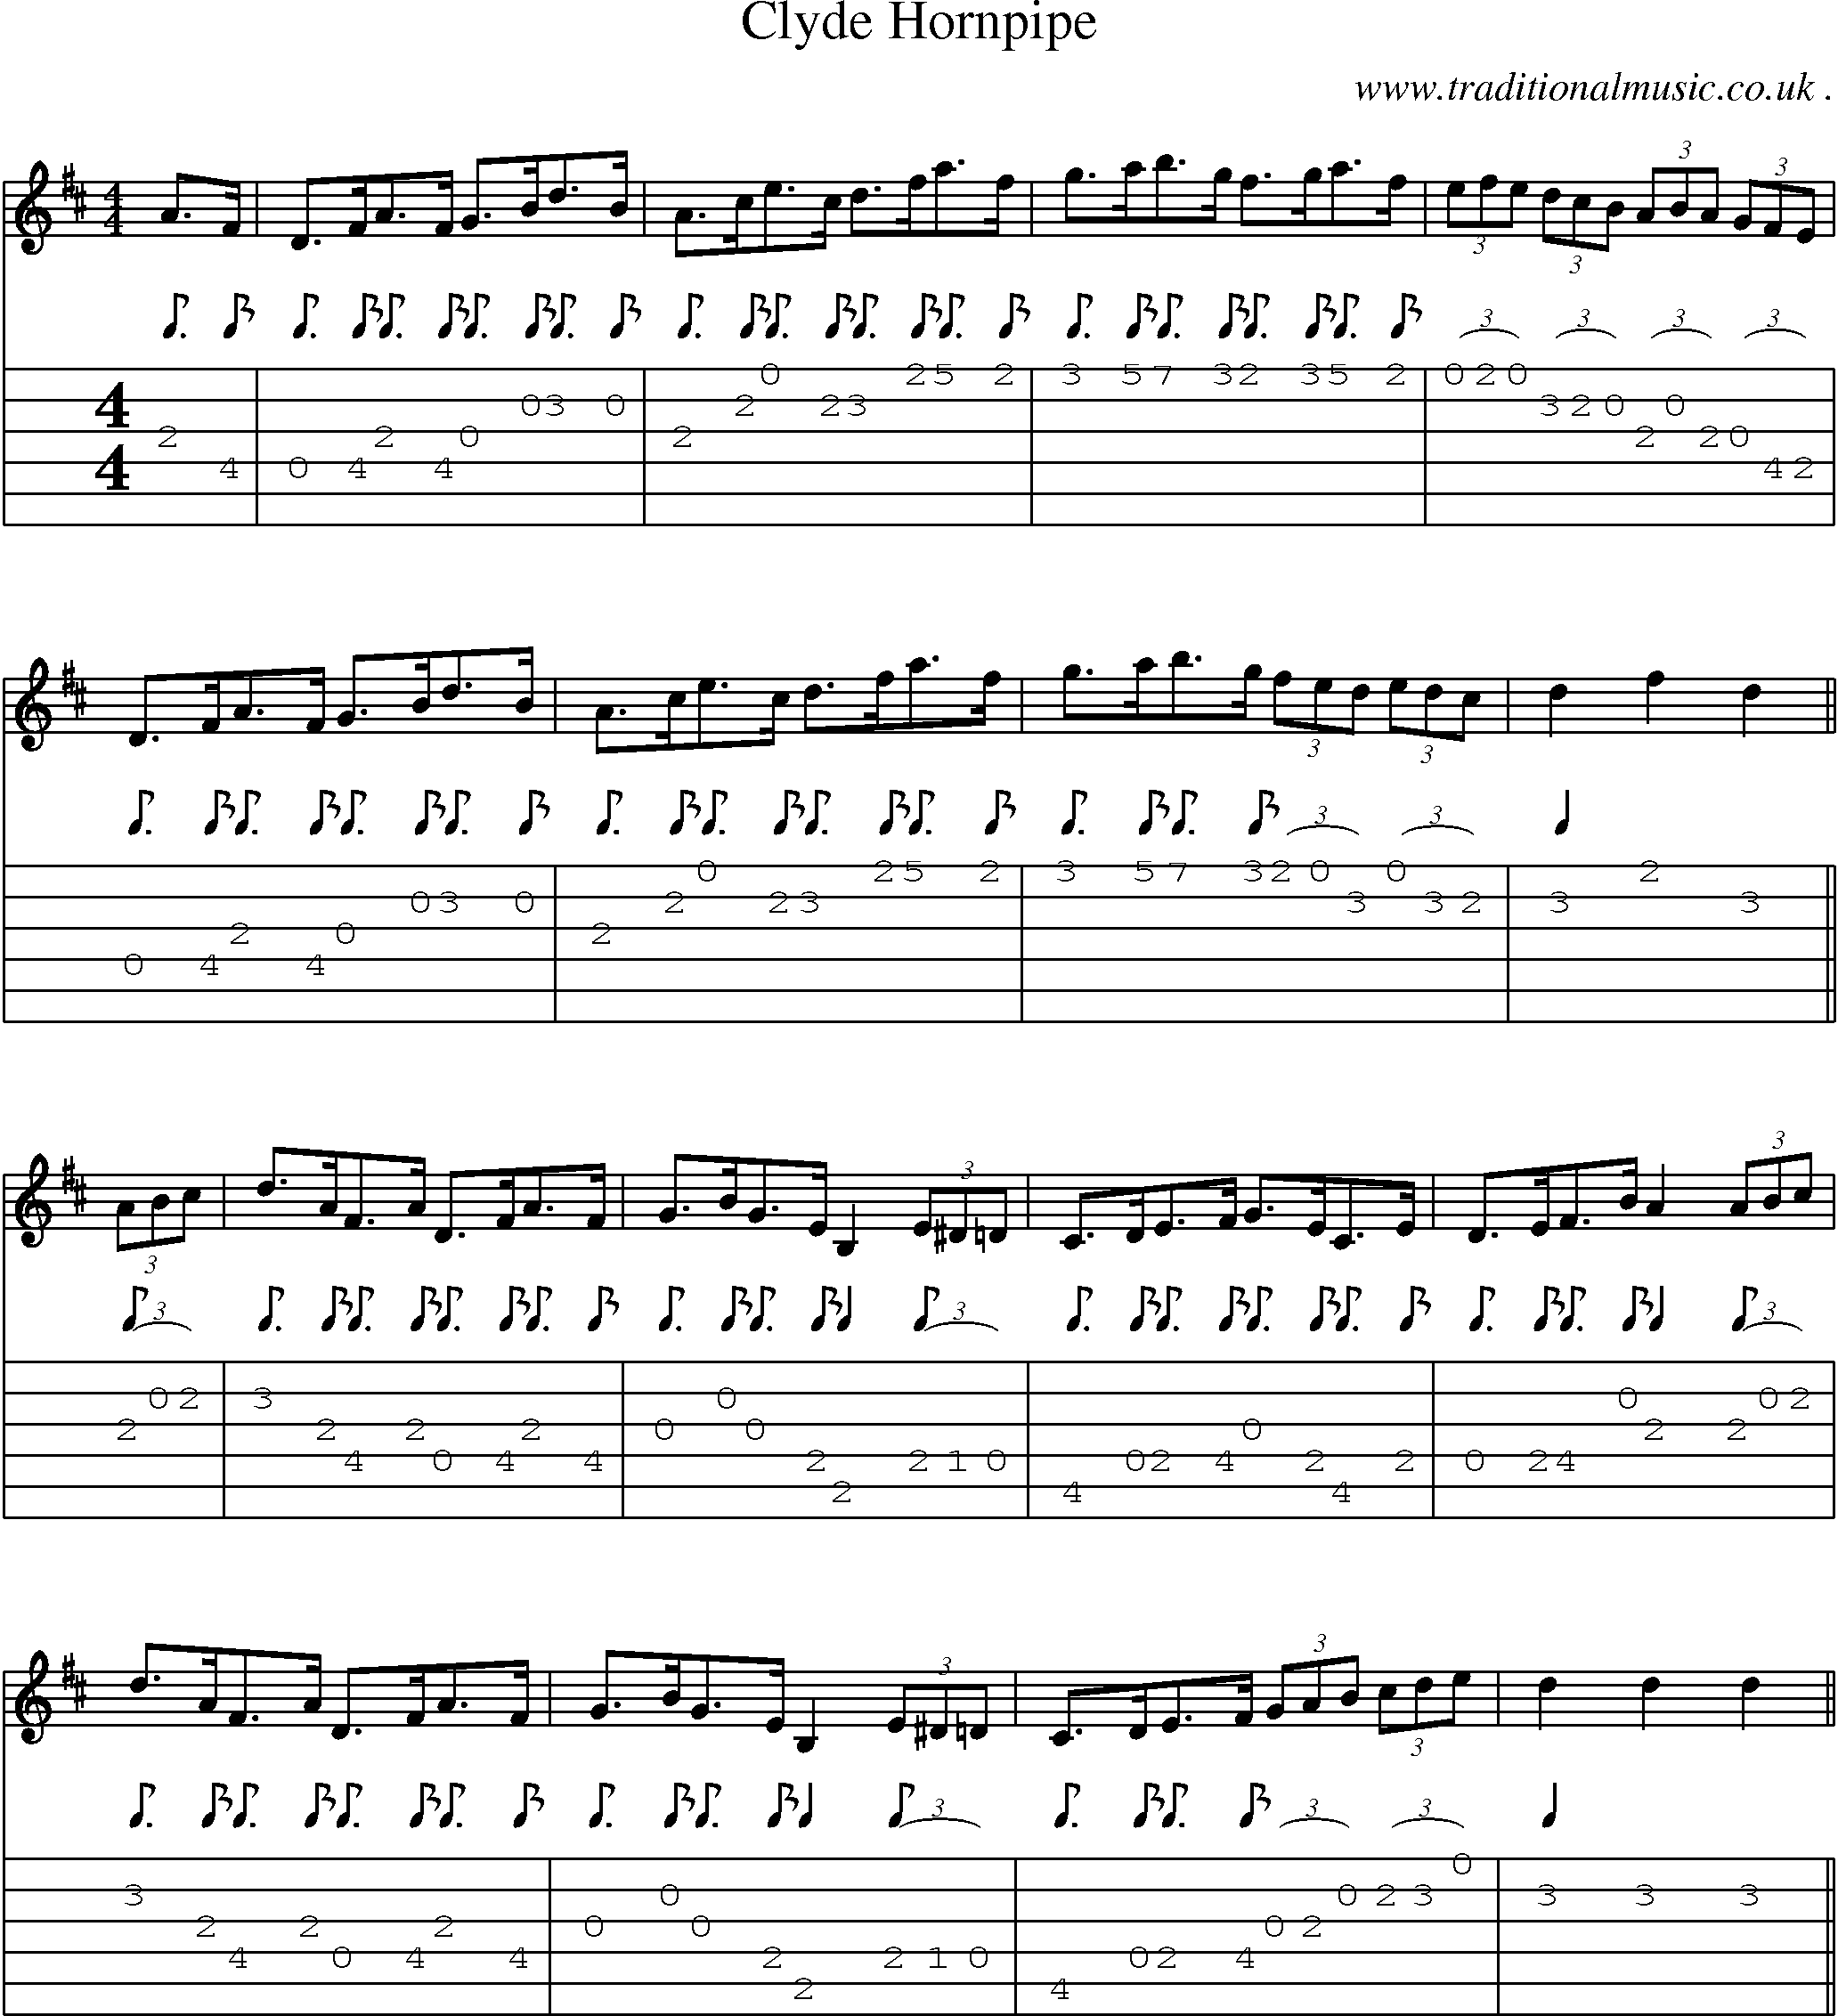 Sheet-Music and Guitar Tabs for Clyde Hornpipe